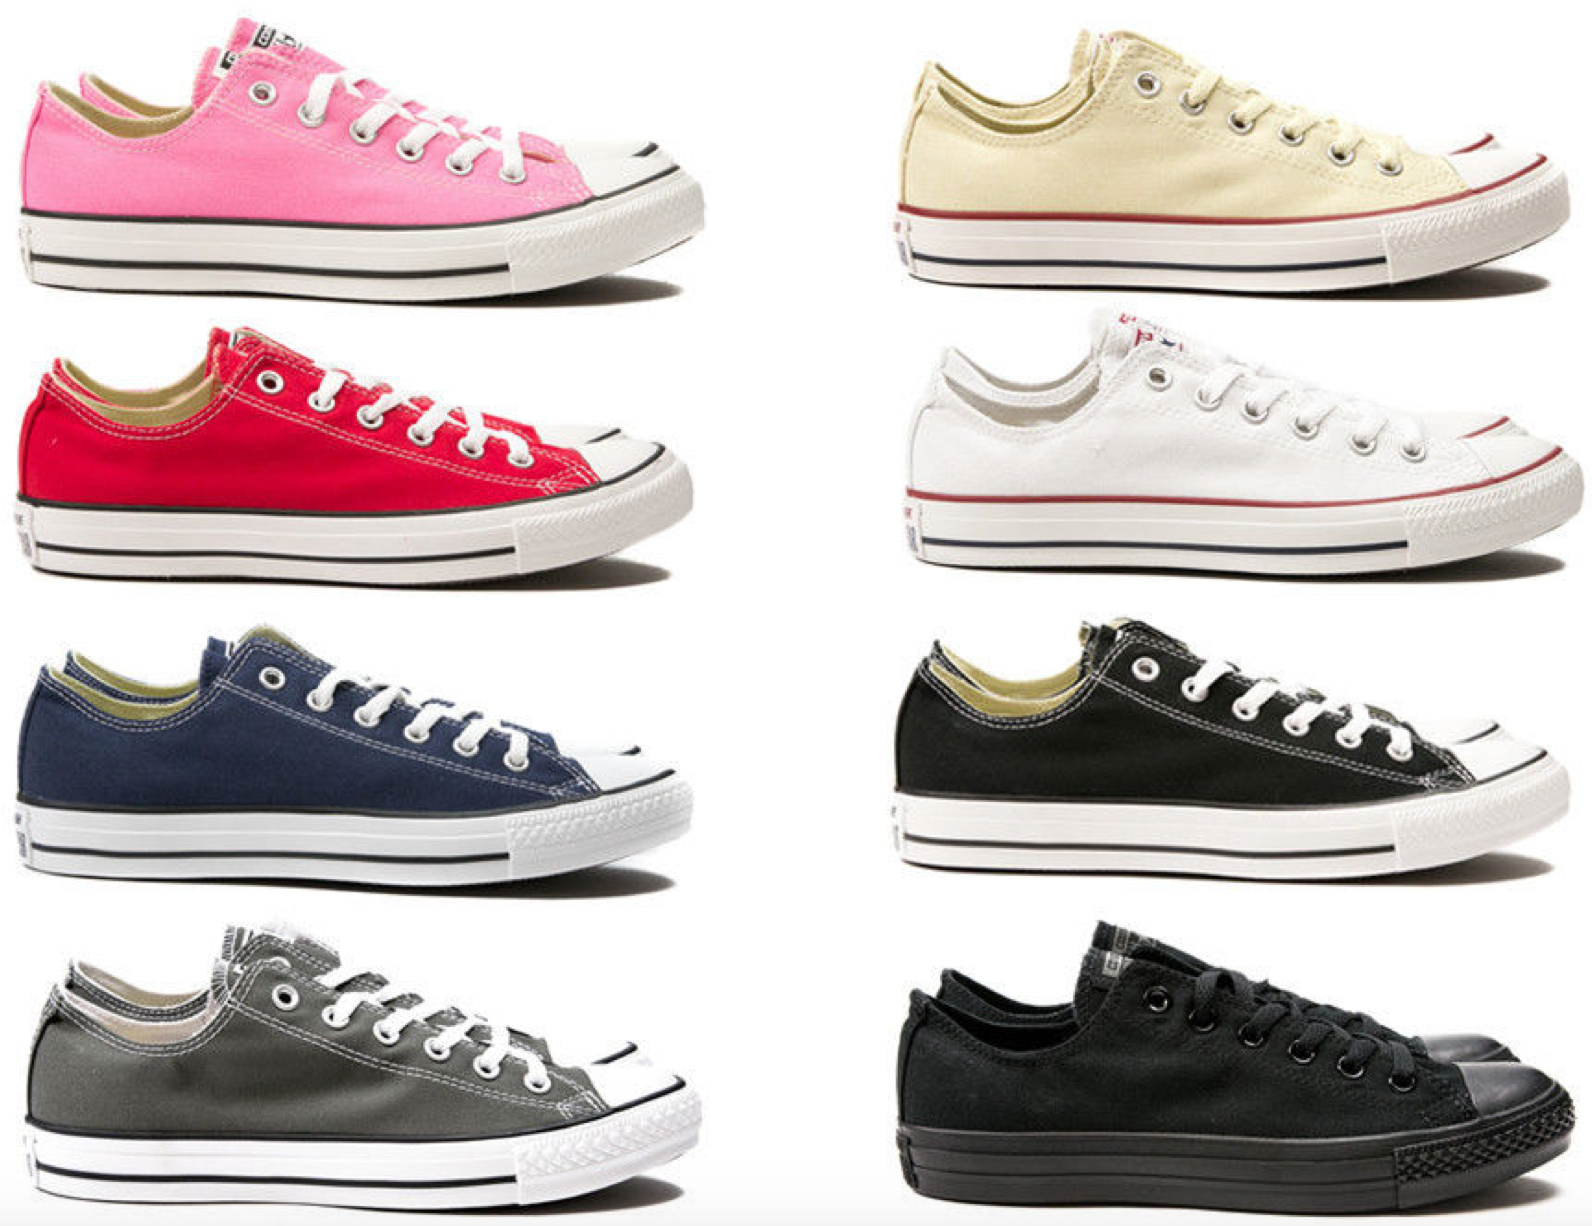 Converse Chuck Taylor All-Star Ox Lowtop Unisex Sneakers ONLY $29.99 ...